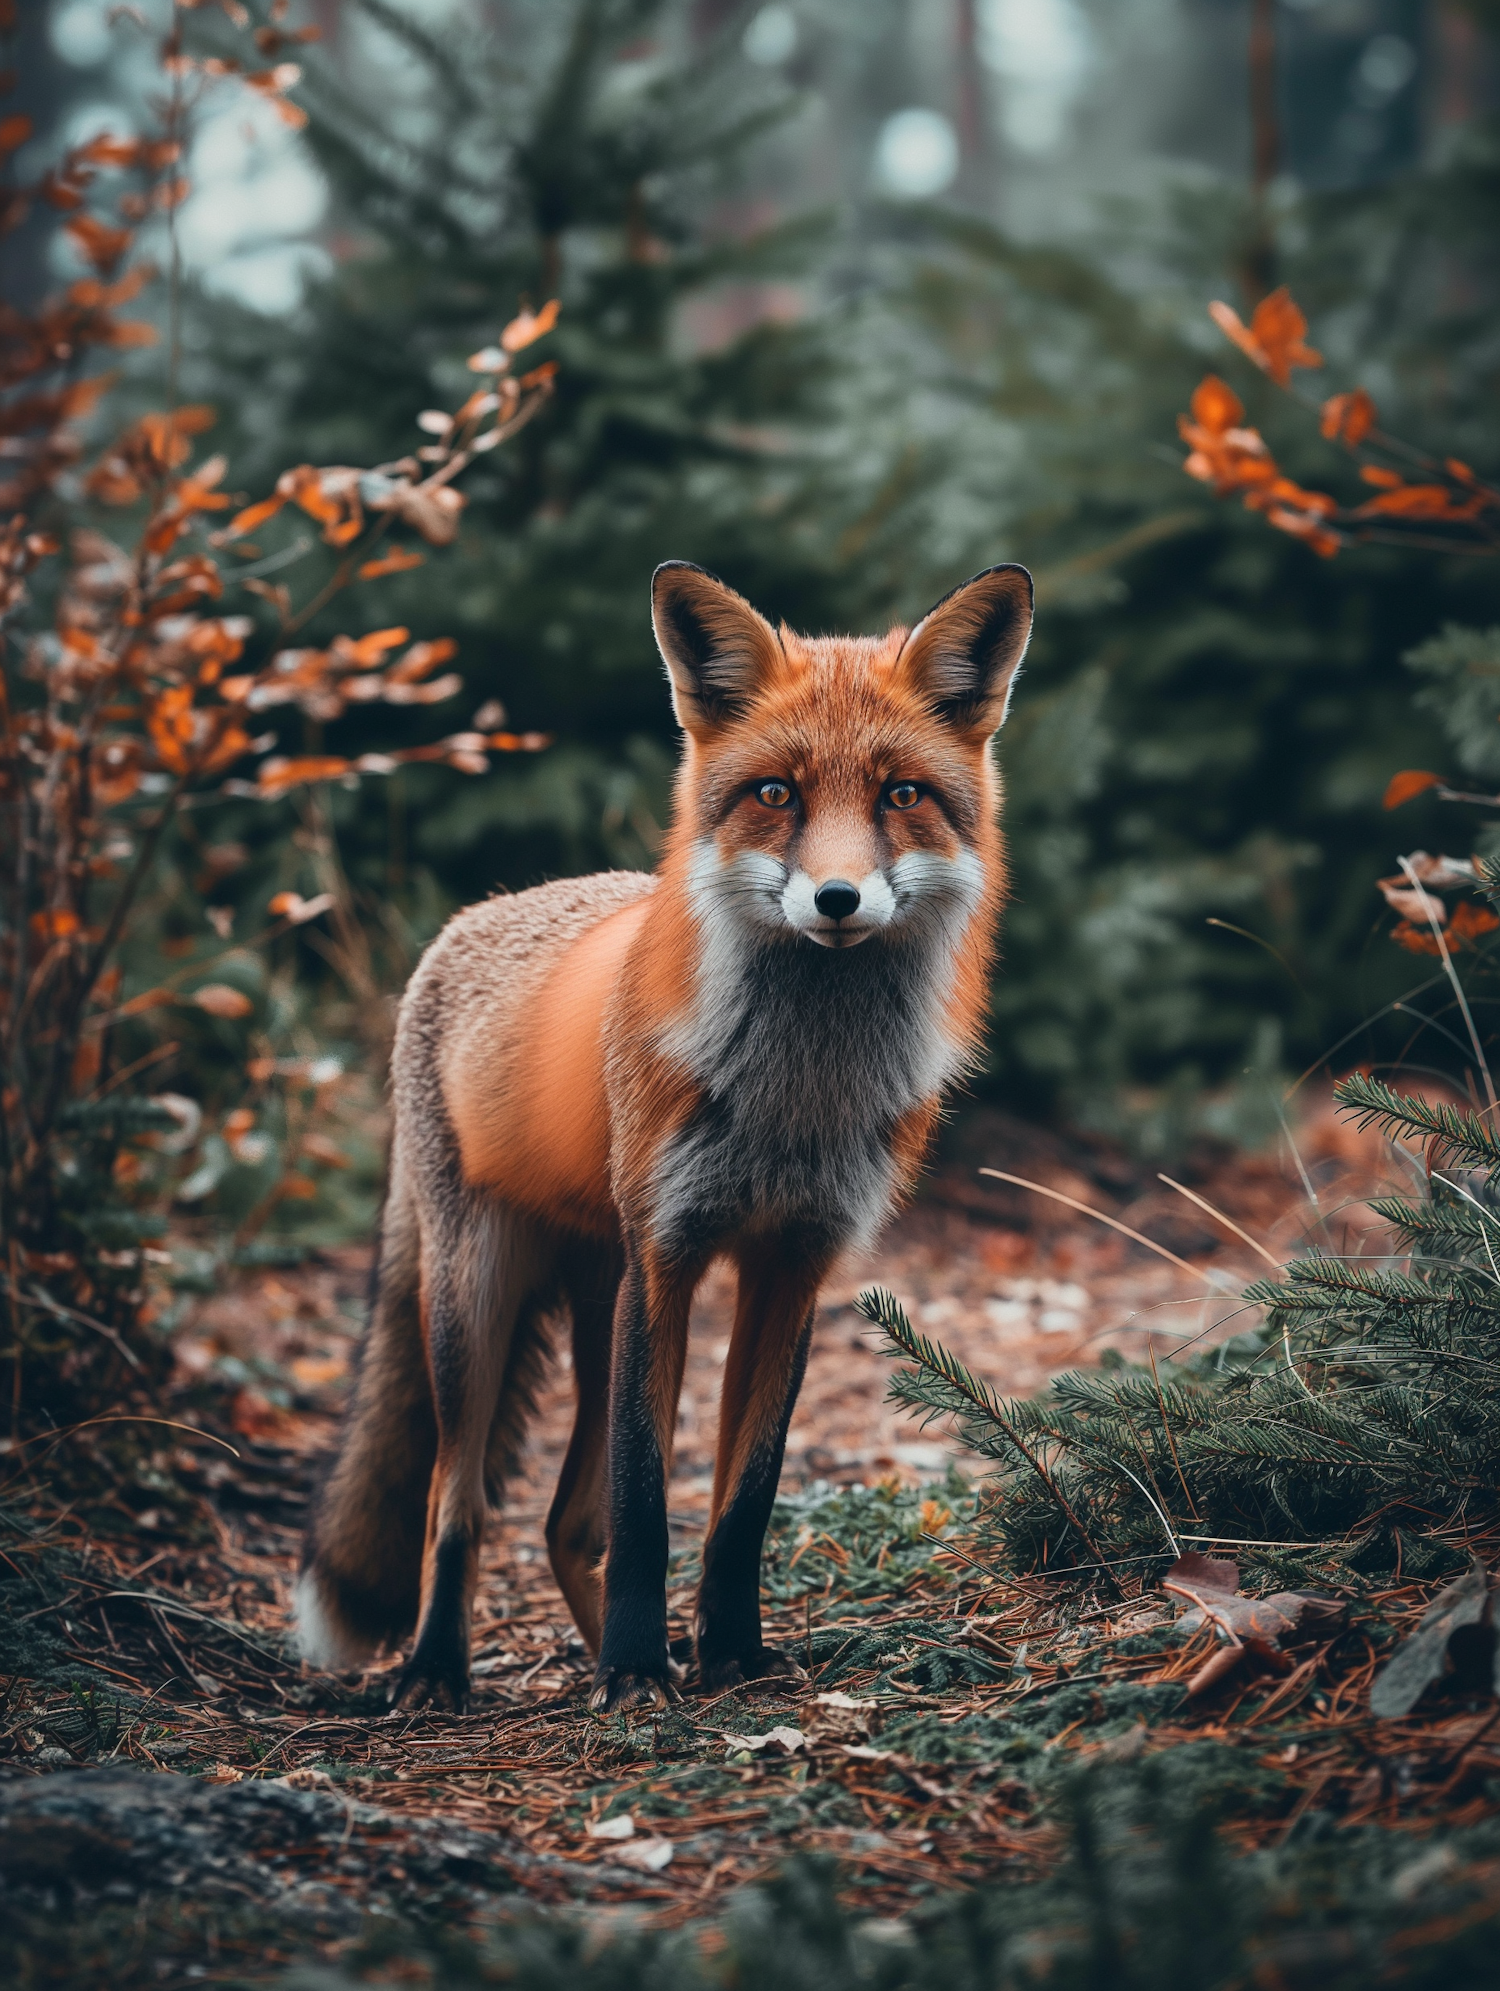 Portrait of a Red Fox in Autumn Forest